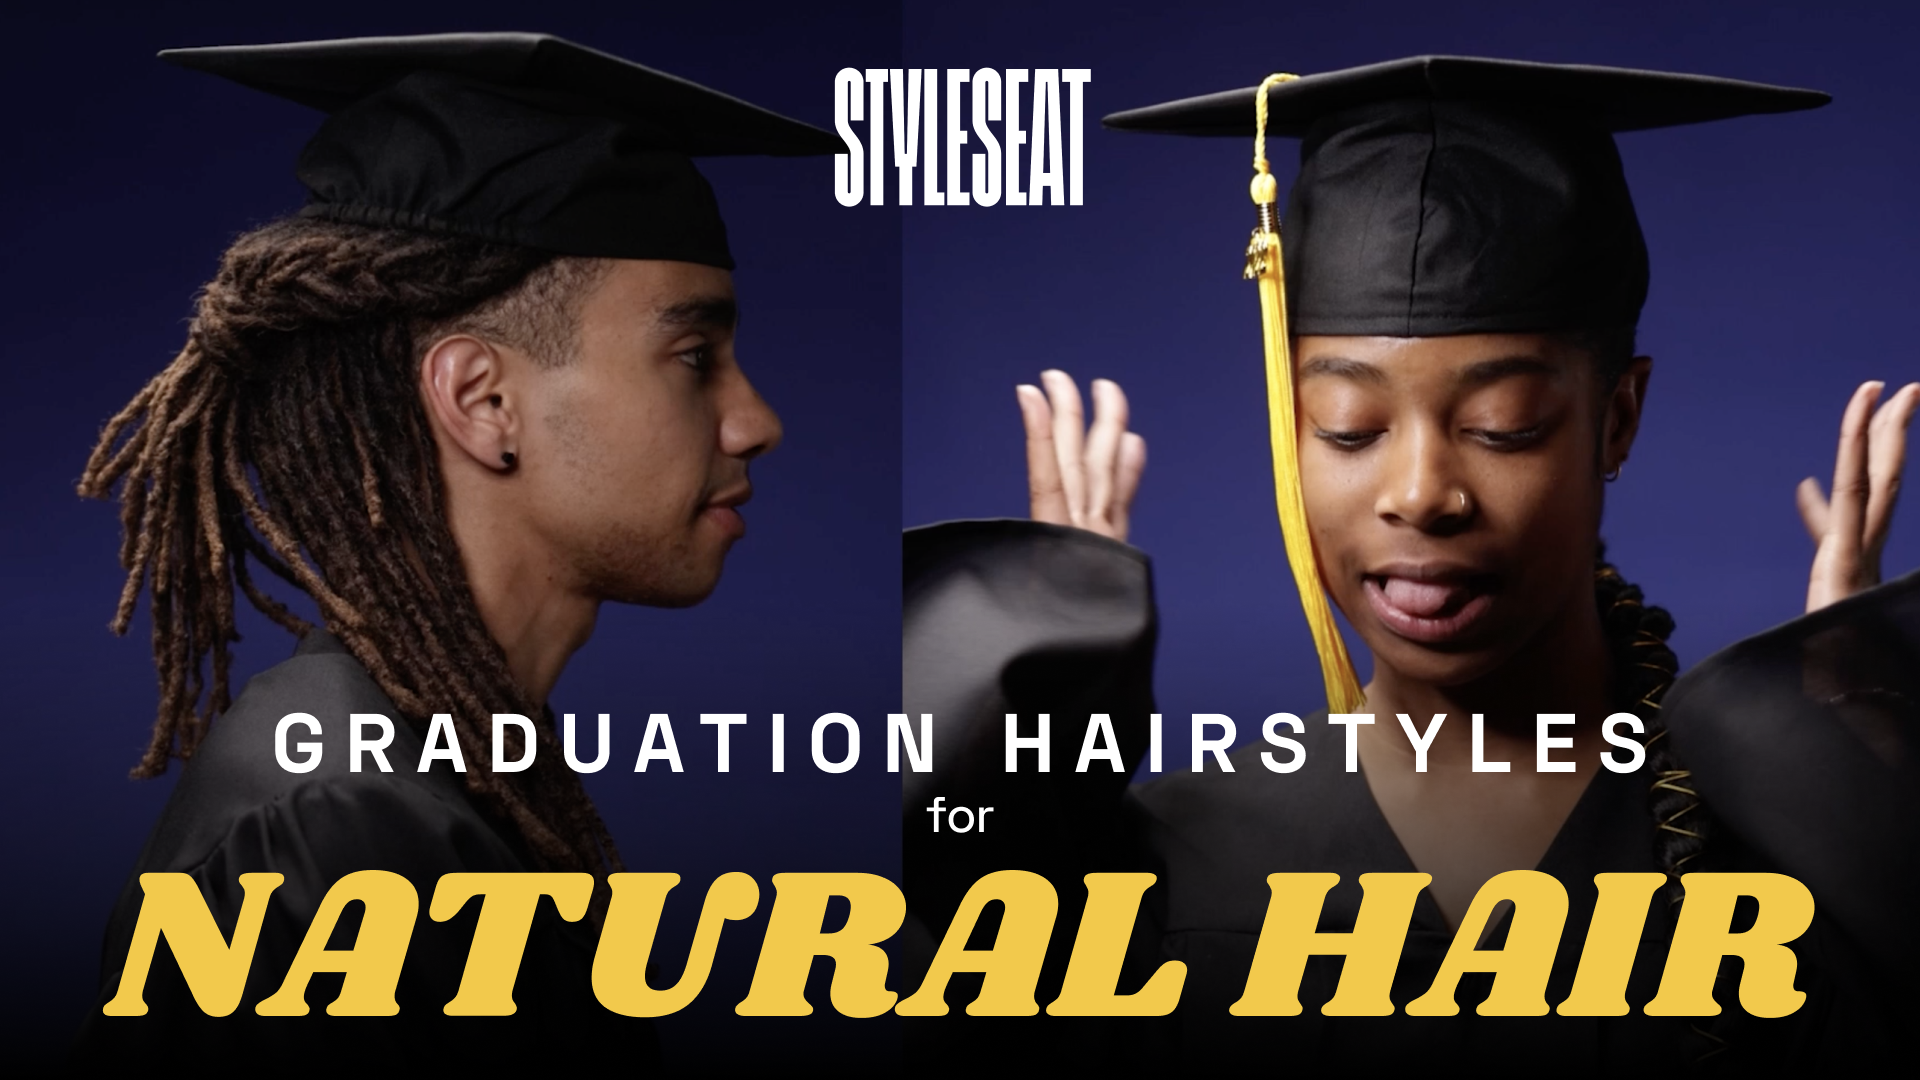 6 Graduation Hairstyles for Natural Hair - StyleSeat Pro Beauty Blog